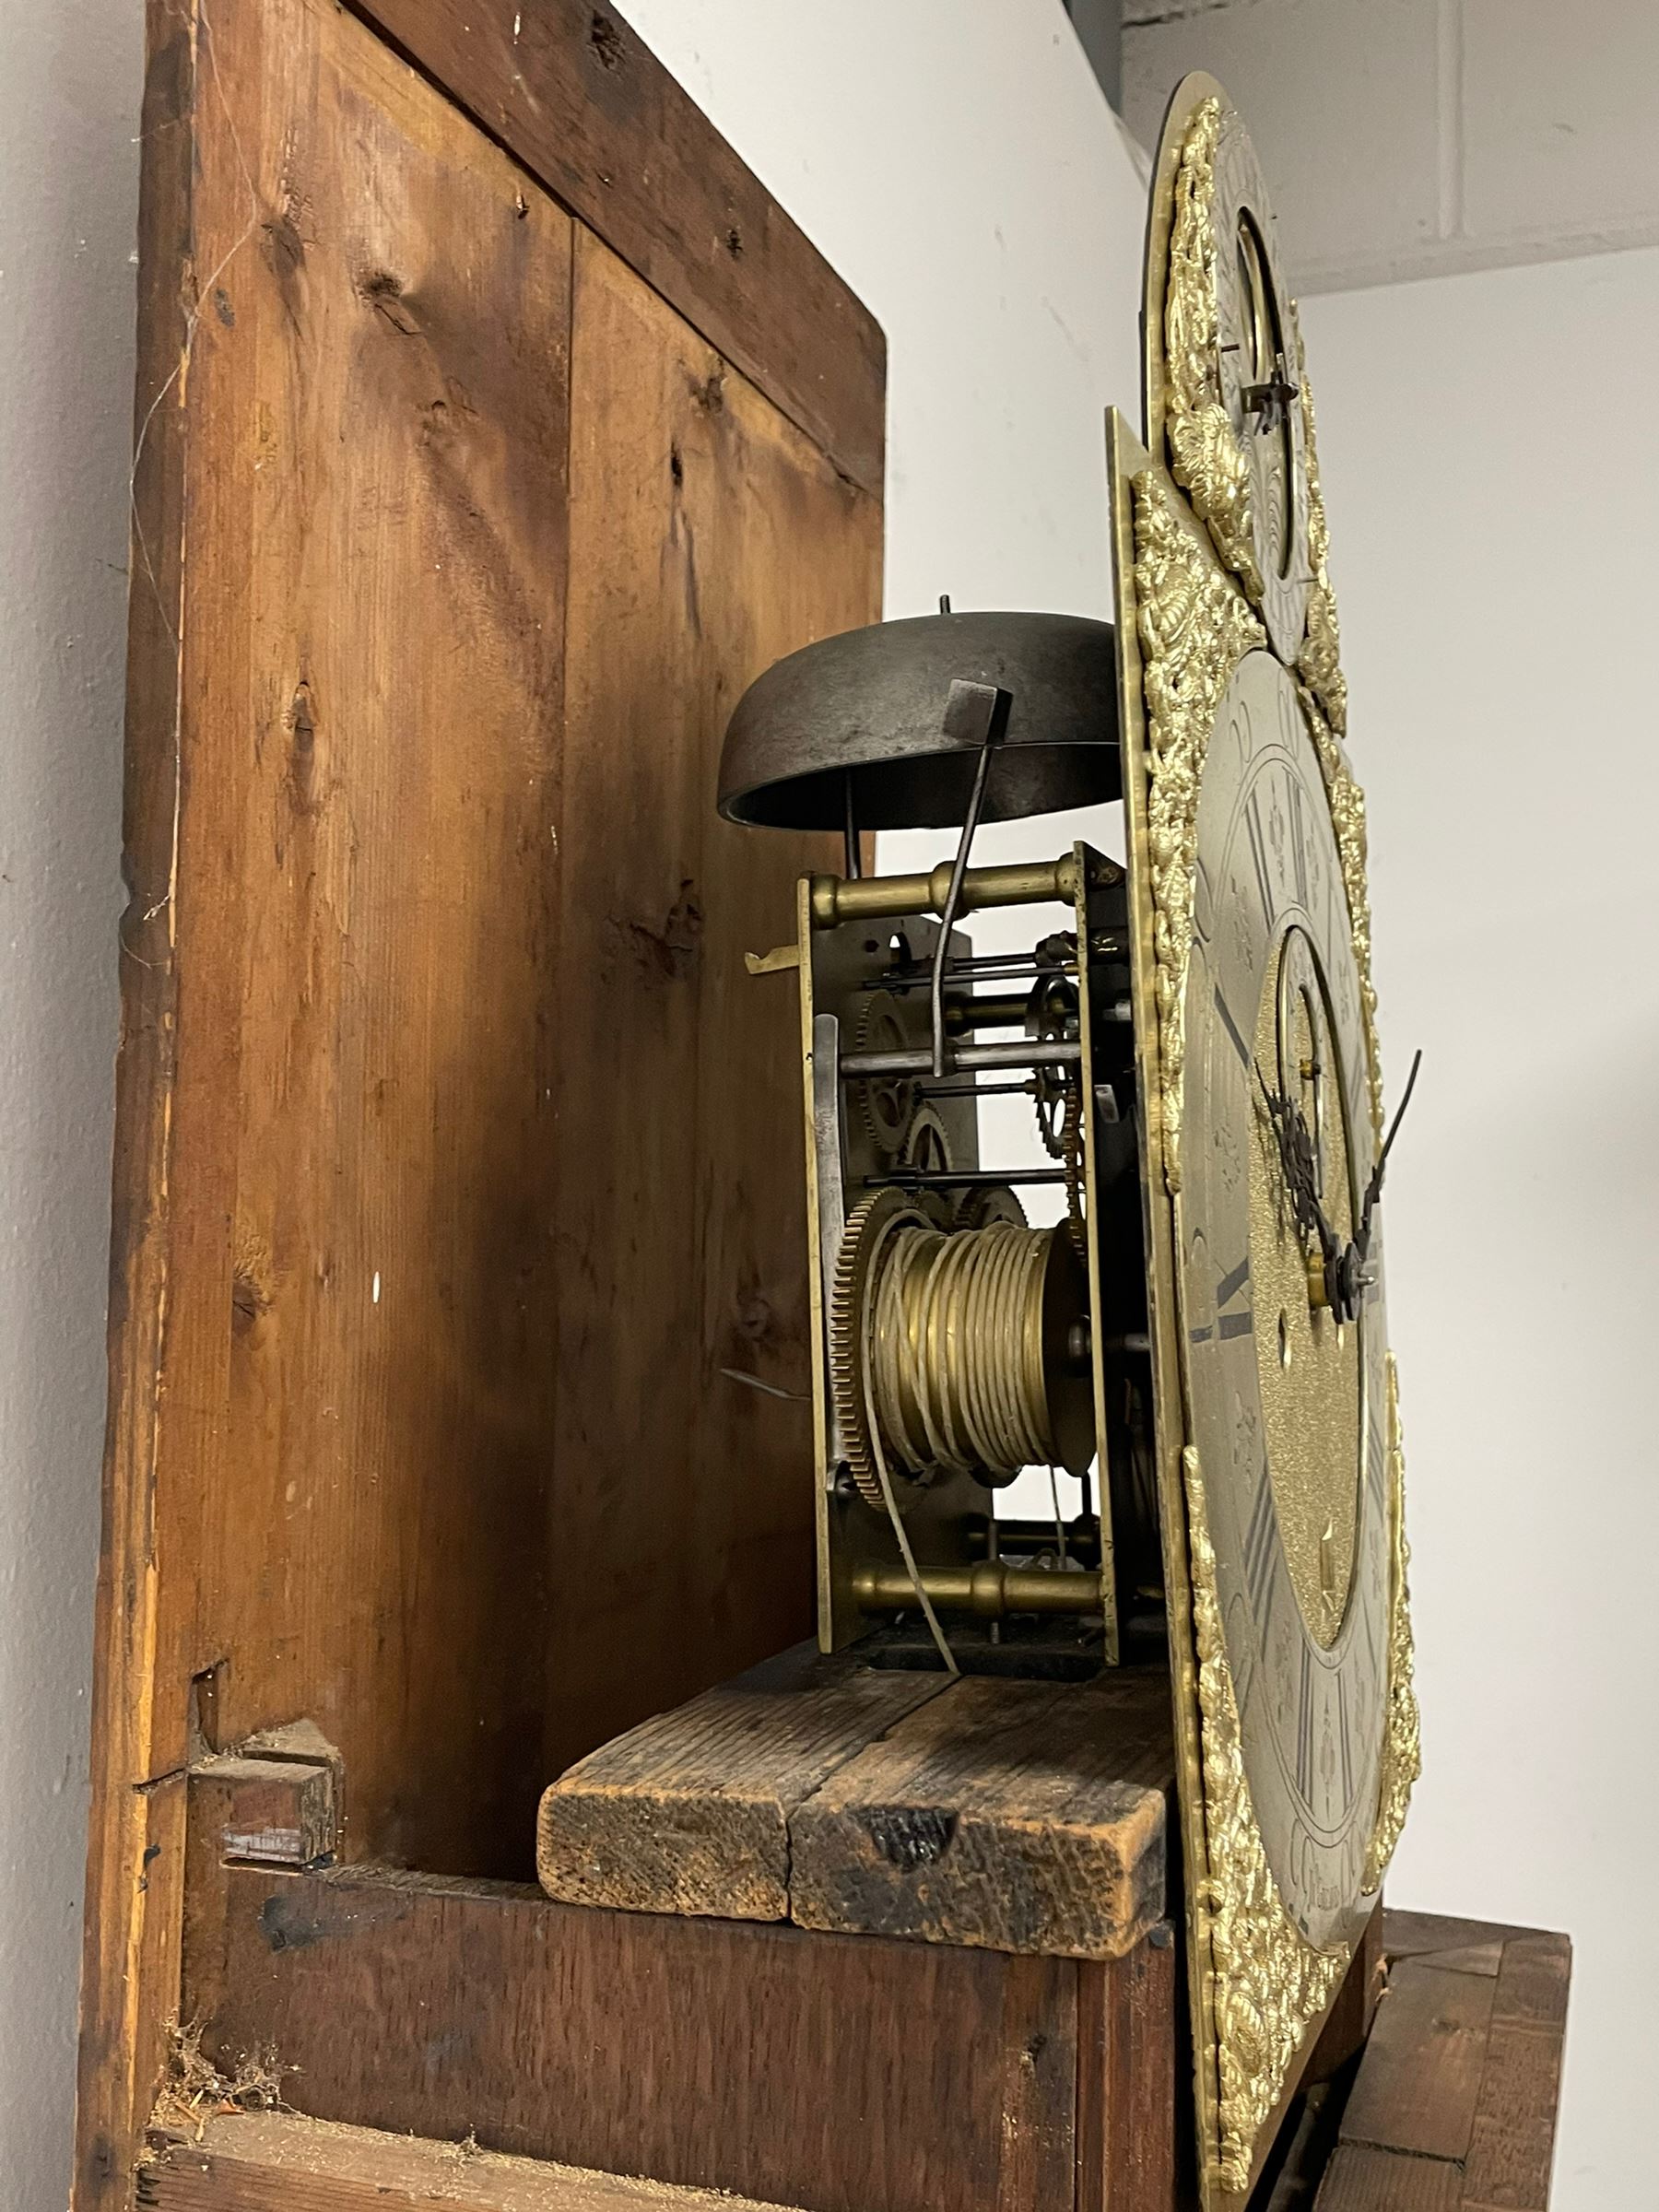 John Greaves of Newcastle - Mid-18th century 8-day oak longcase clock with a flat top - Image 5 of 12